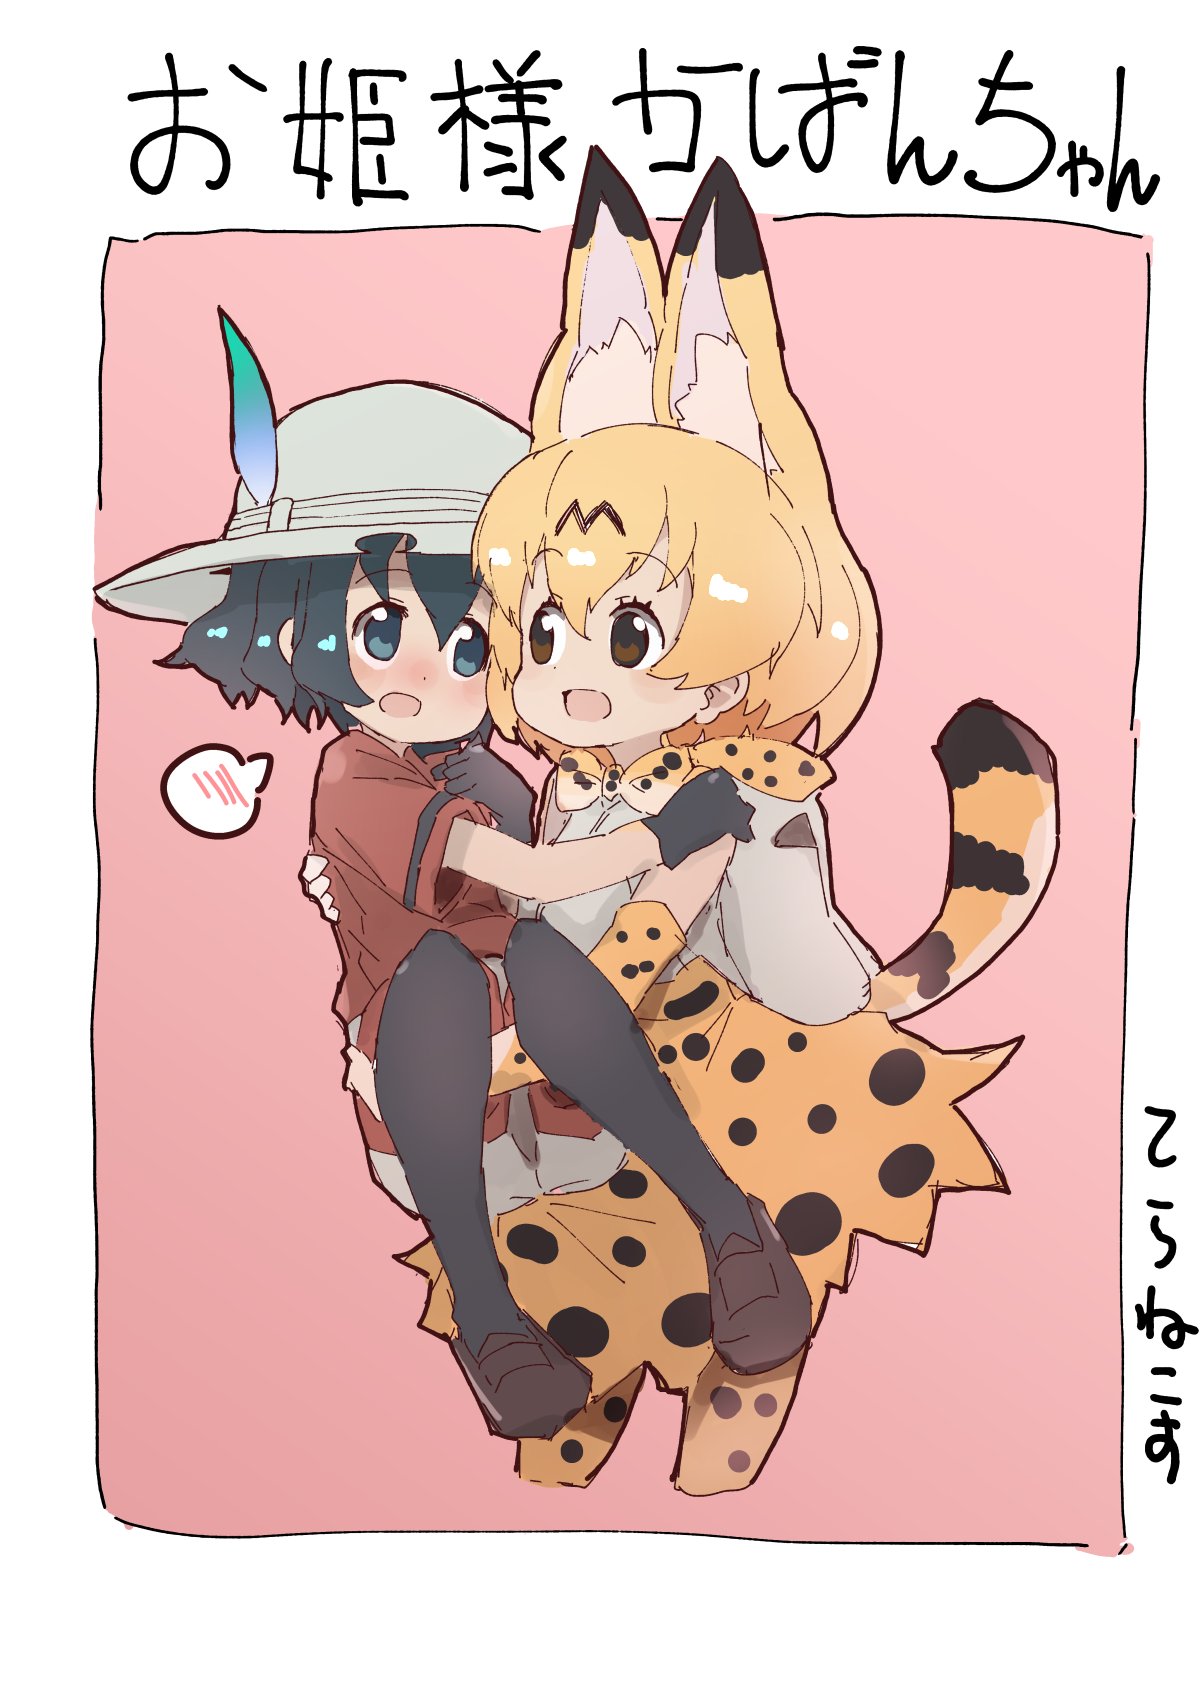 2girls animal_ears black_hair blonde_hair blush bow bowtie bucket_hat carrying elbow_gloves eyebrows_visible_through_hair gloves hat high-waist_skirt highres kaban_(kemono_friends) kemono_friends multicolored_hair multiple_girls pantyhose princess_carry serval_(kemono_friends) serval_ears serval_print serval_tail shirt short_hair short_sleeves shorts skirt sleeveless t-shirt tail teranekosu thigh-highs translated